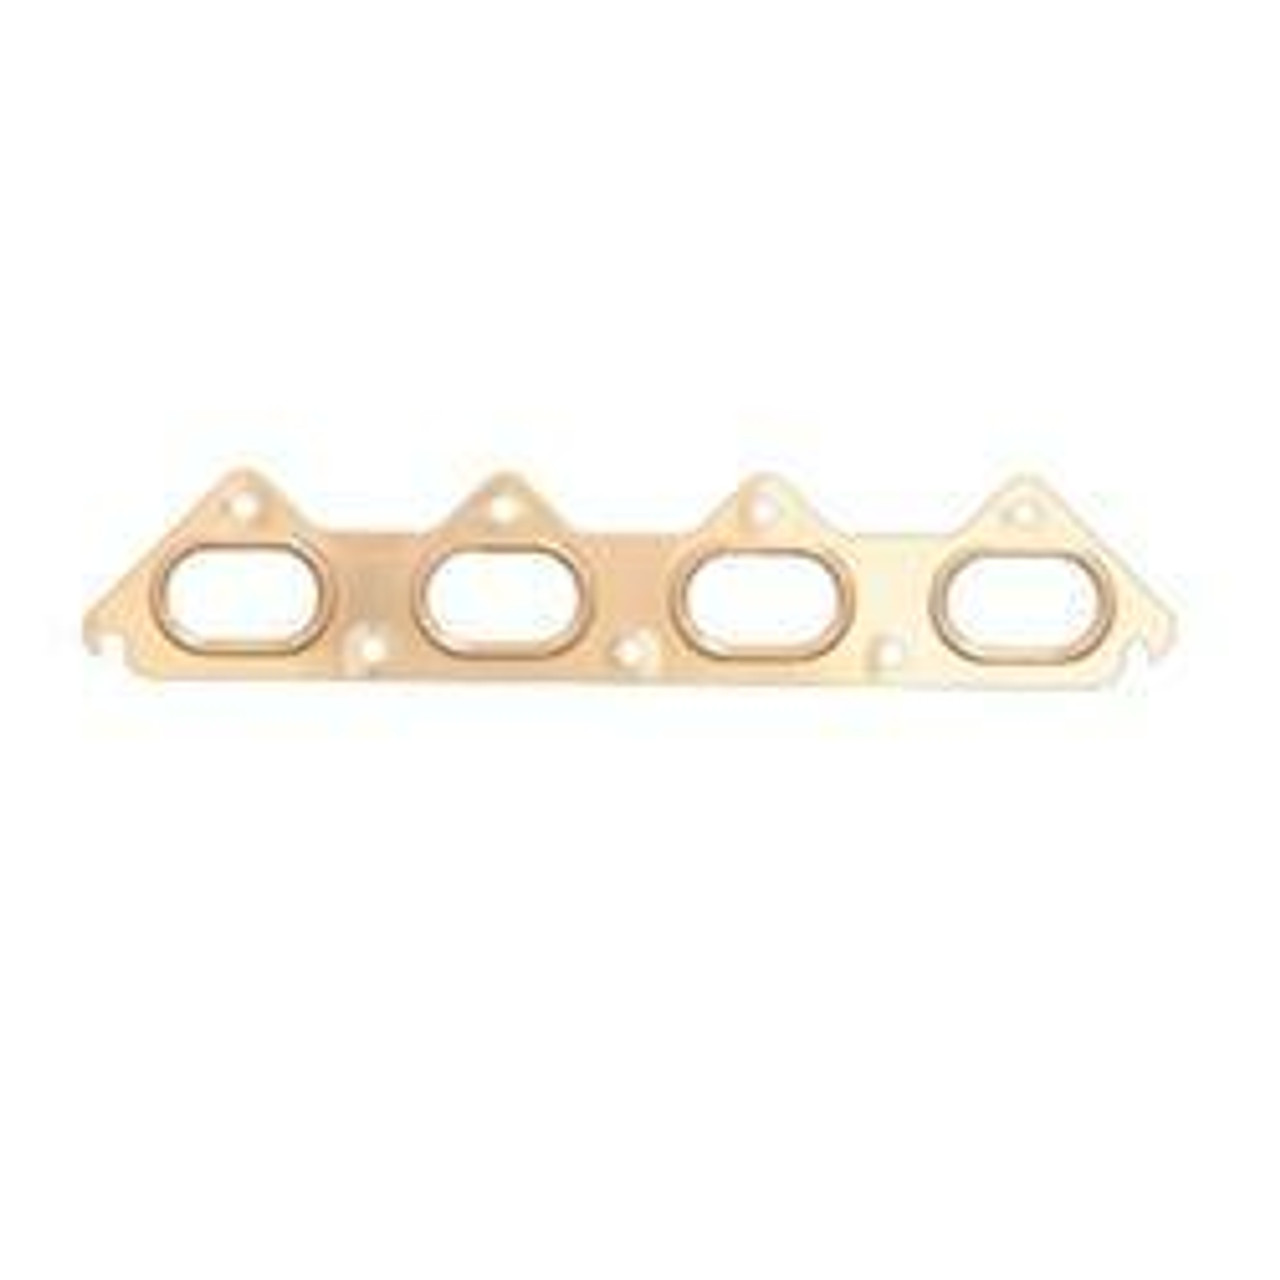 Header Gaskets, Other race applications